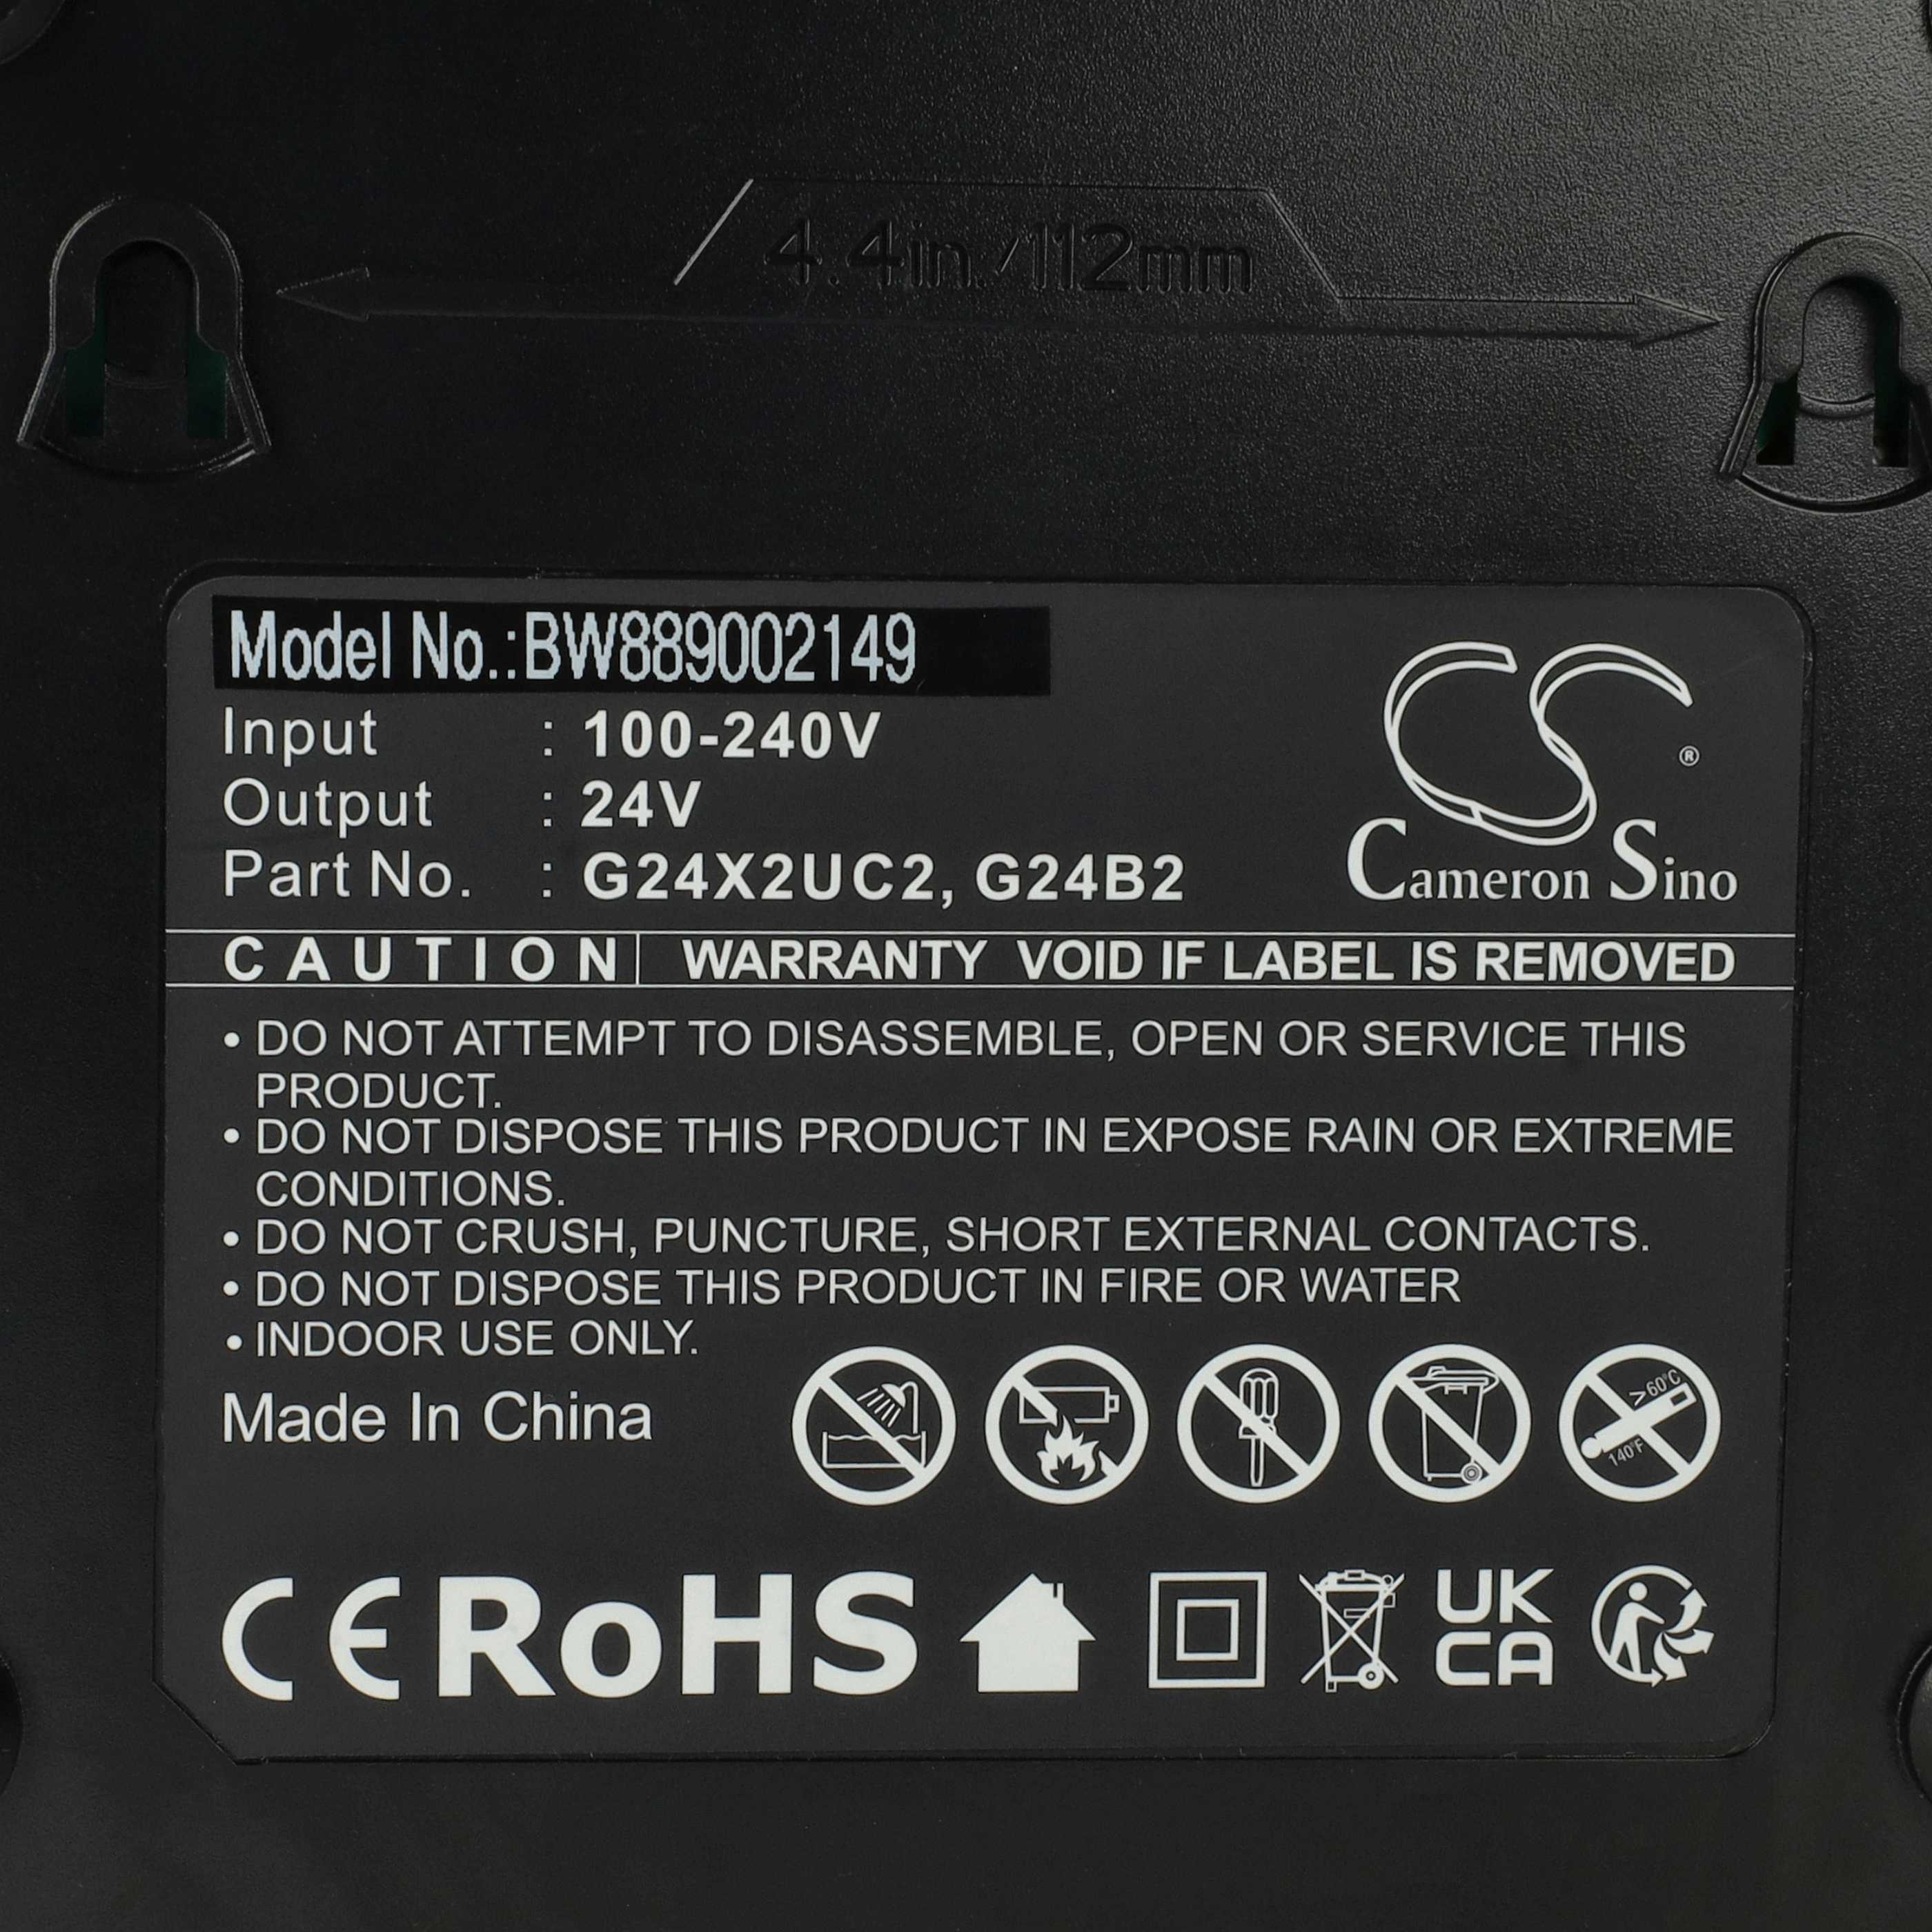 Dual Charger replaces Alpina C24 Li, CG 24 for AlpinaPower Tool Batteries etc. Li-Ion 24 V